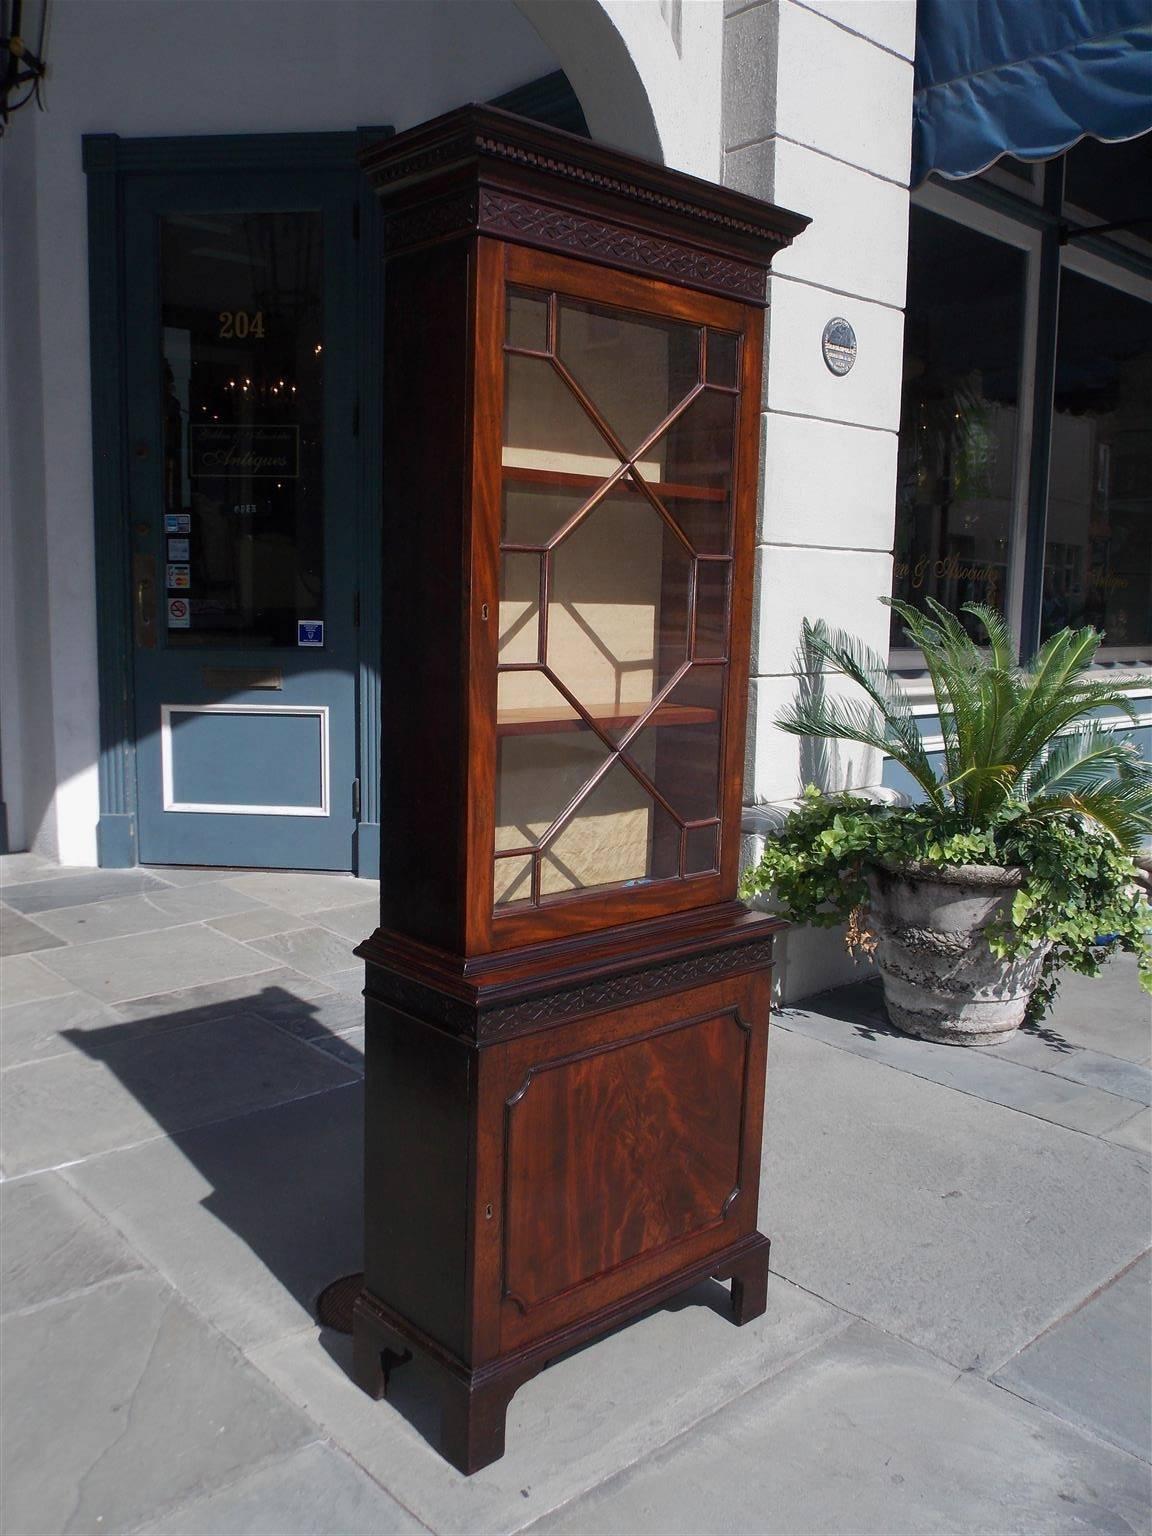 English mahogany Chippendale style diminutive bookcase with an upper case carved molded edge cornice, dental molding, intricately carved fret work, hinged glass door revealing two interior adjustable shelves, lower case carved molded edge, fret wok,